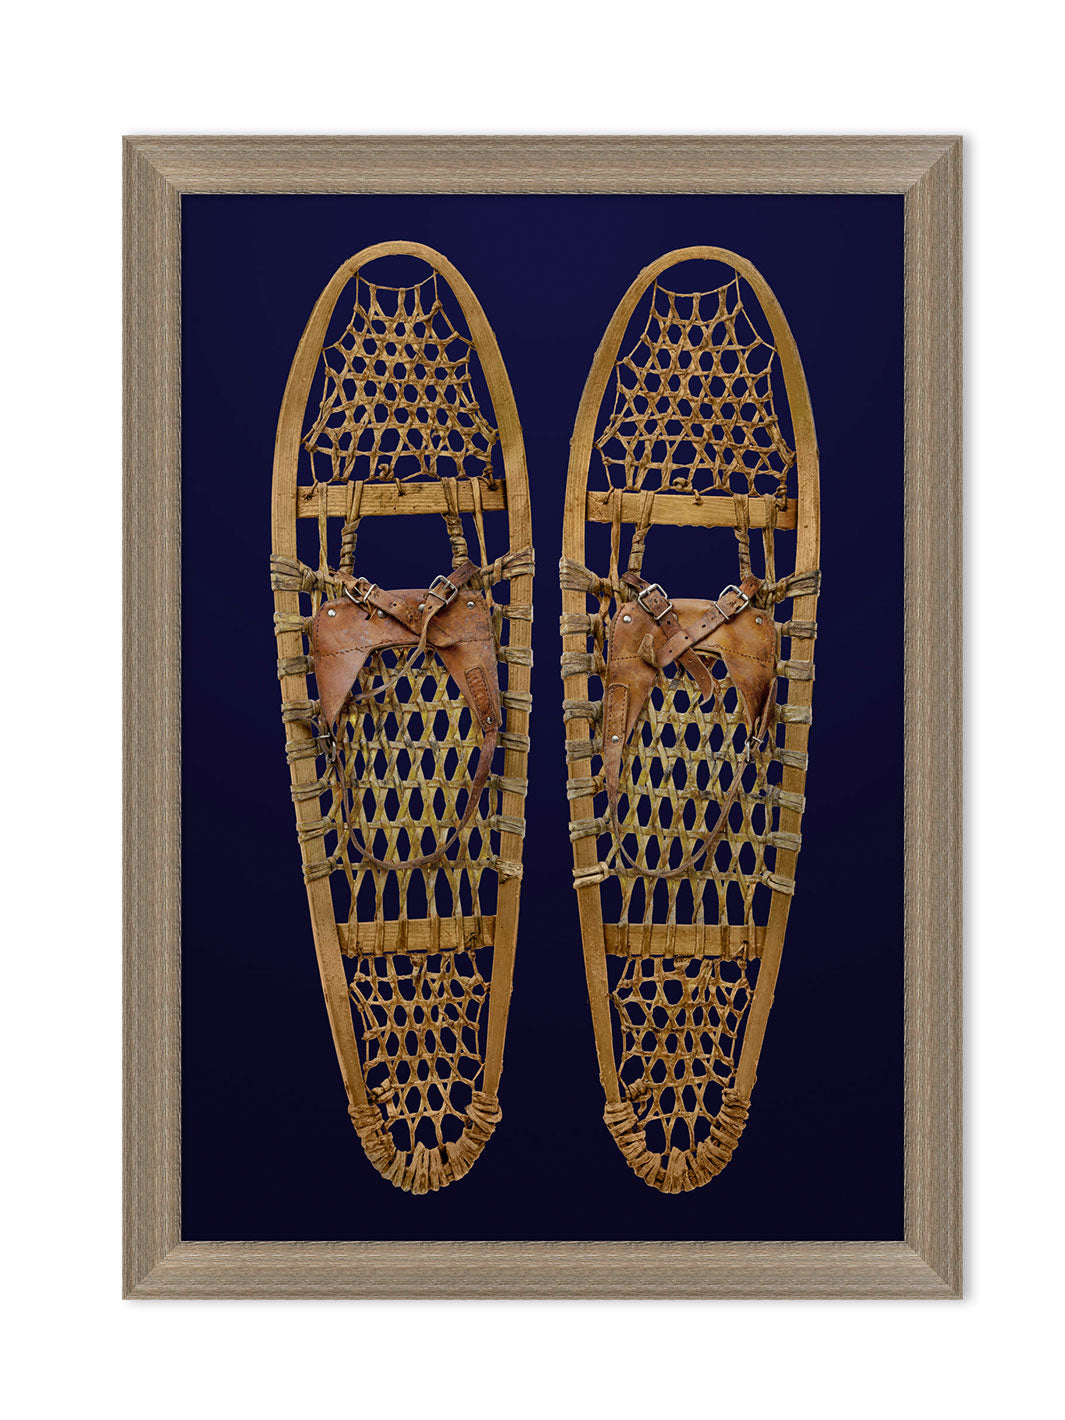 'Wooden Snow Shoes 1' by Nathan Turner Framed Art